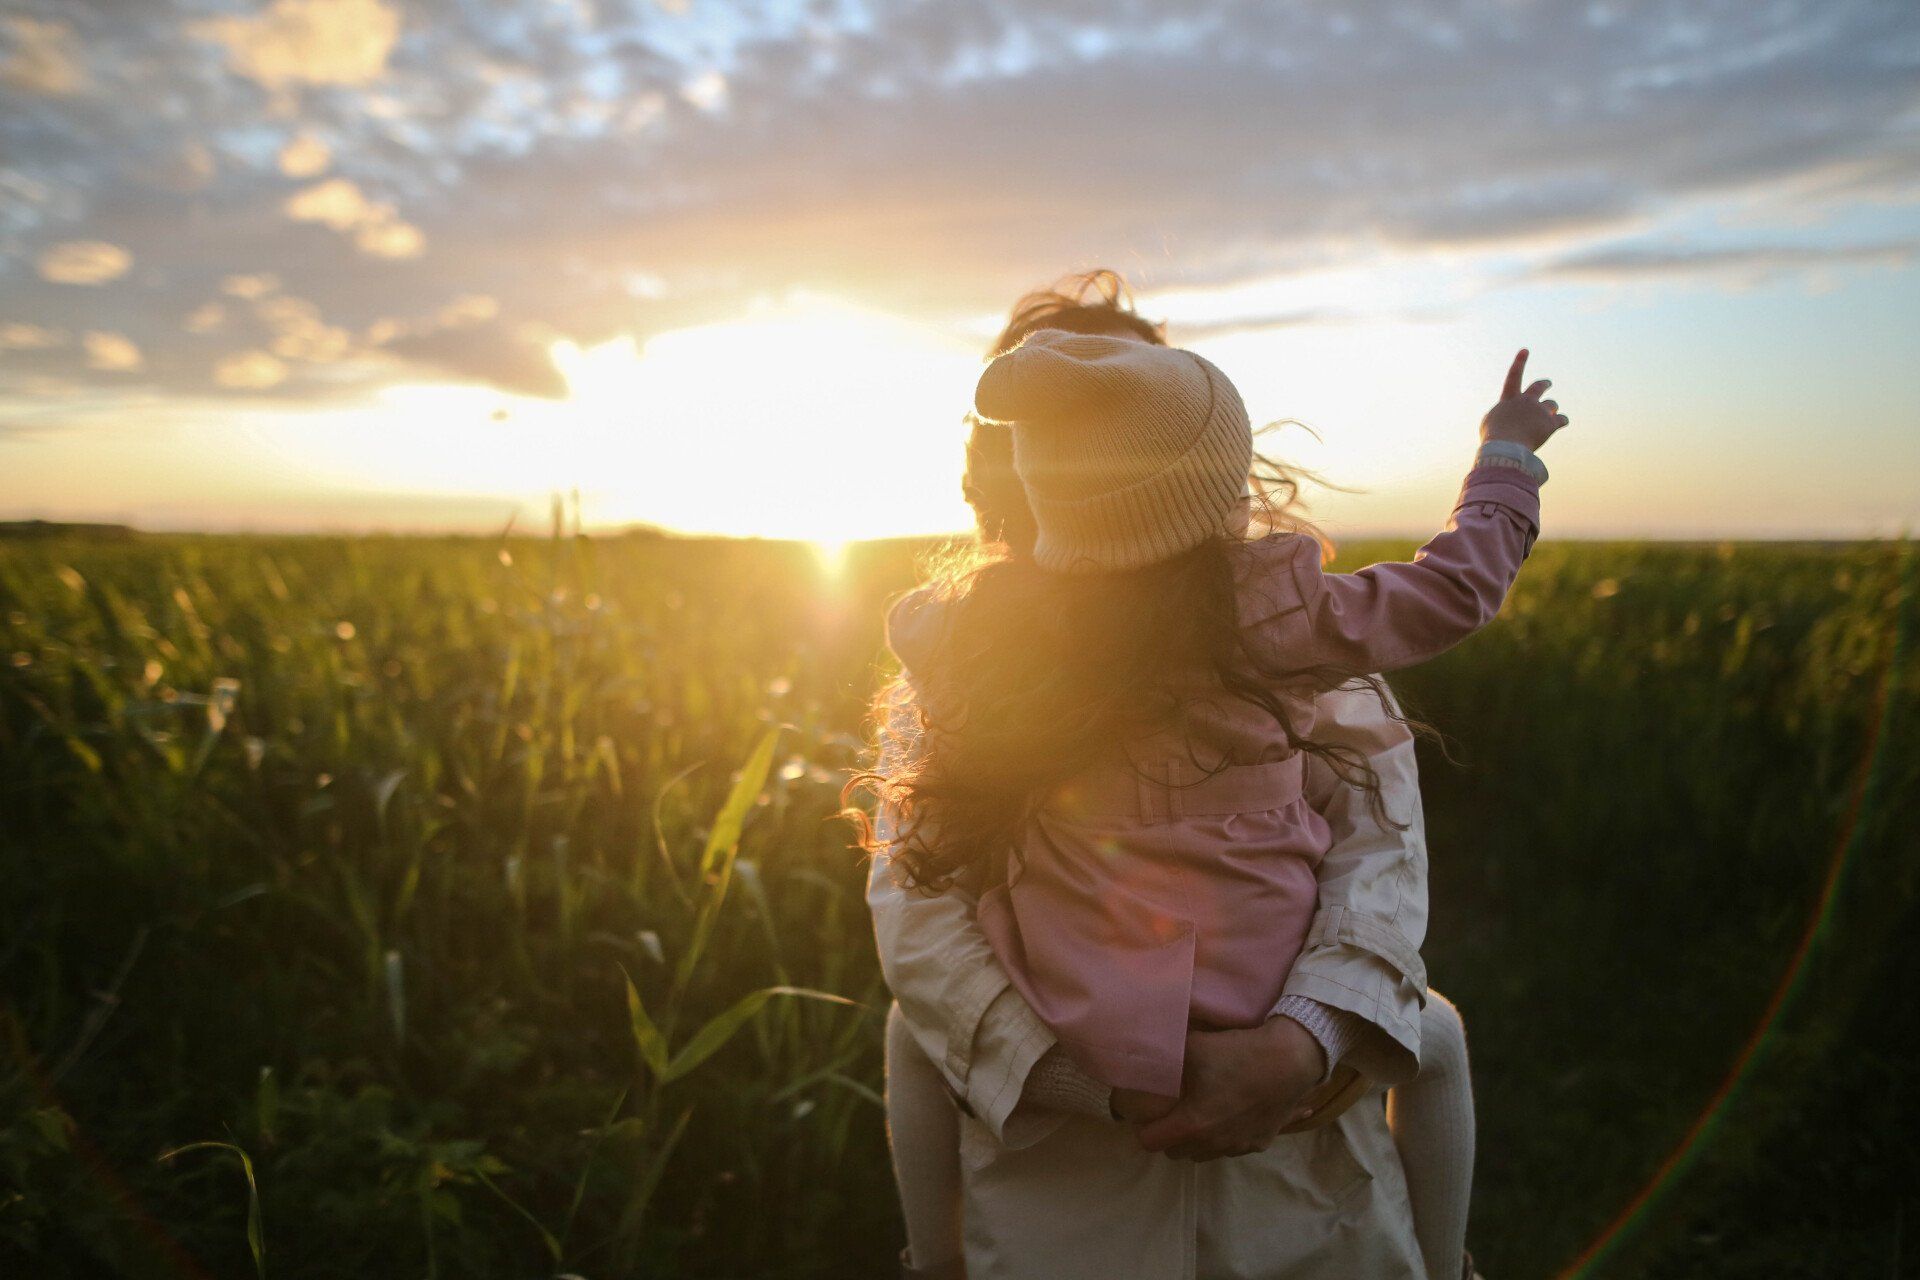 A mom holding her toddler standing in a cornfield at sunset.